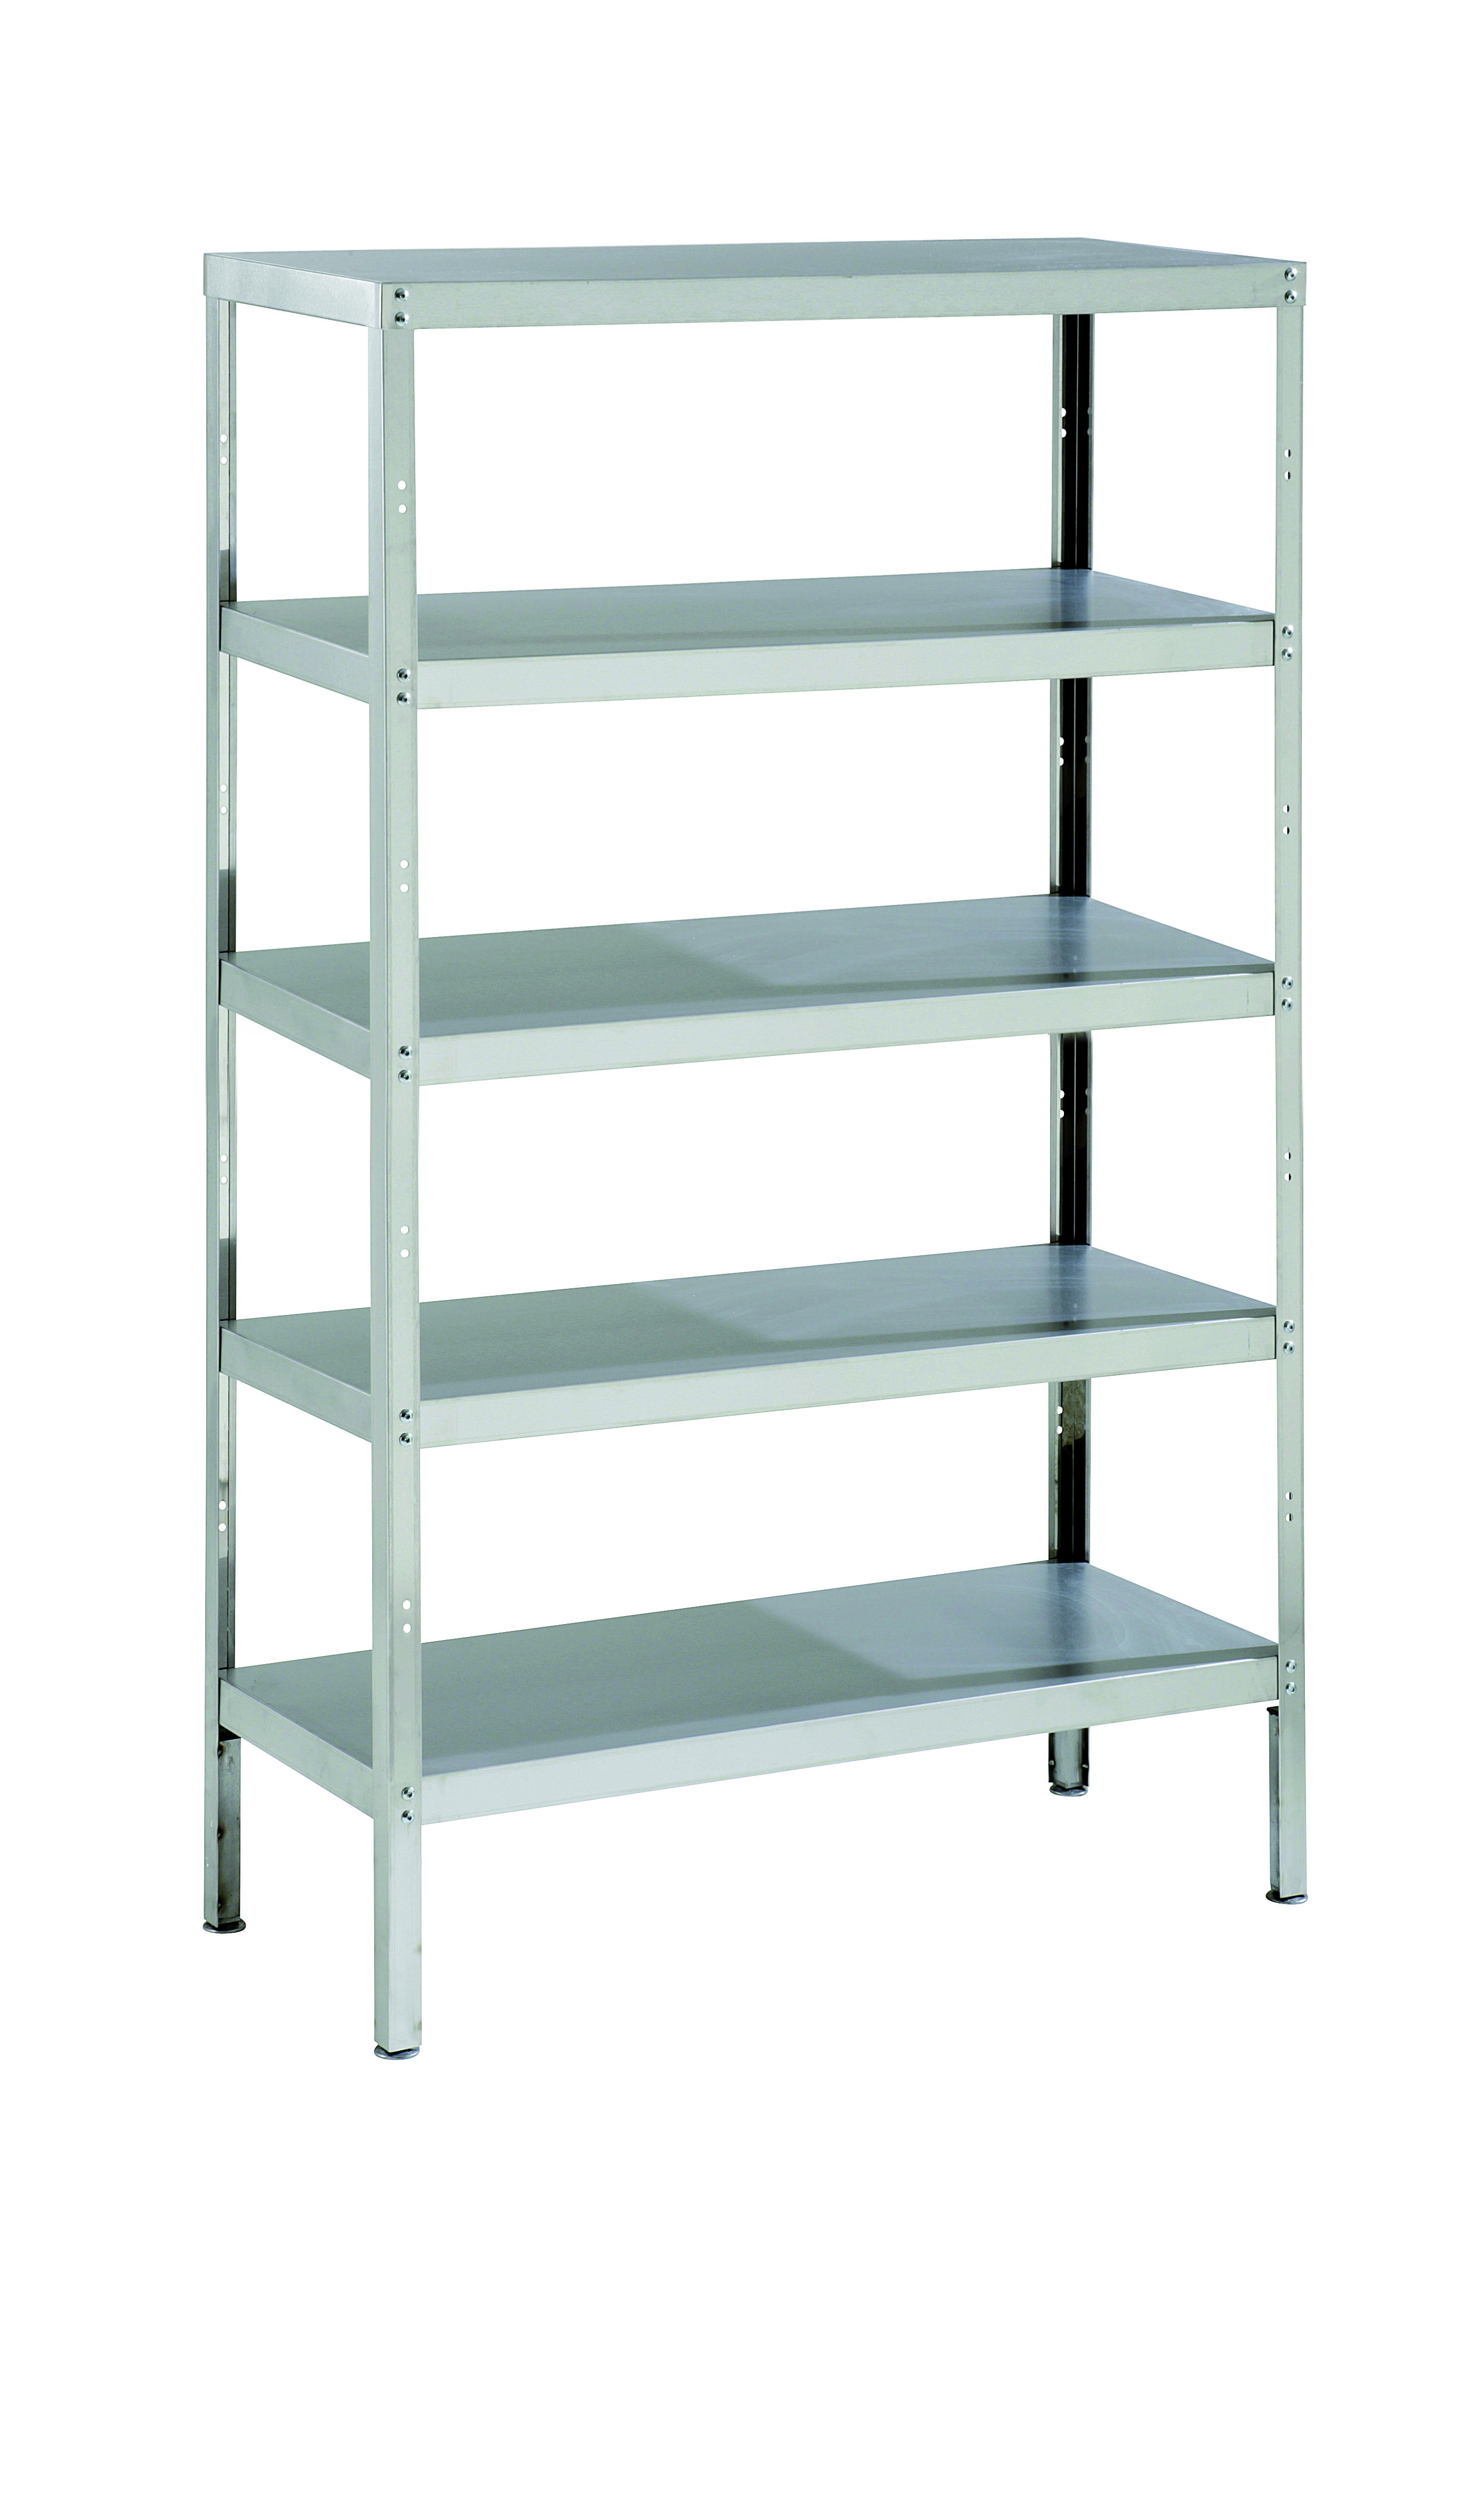 Parry RACK5S - Stainless Steel Storage Rack With 5 Shelves And Adjustable Feet